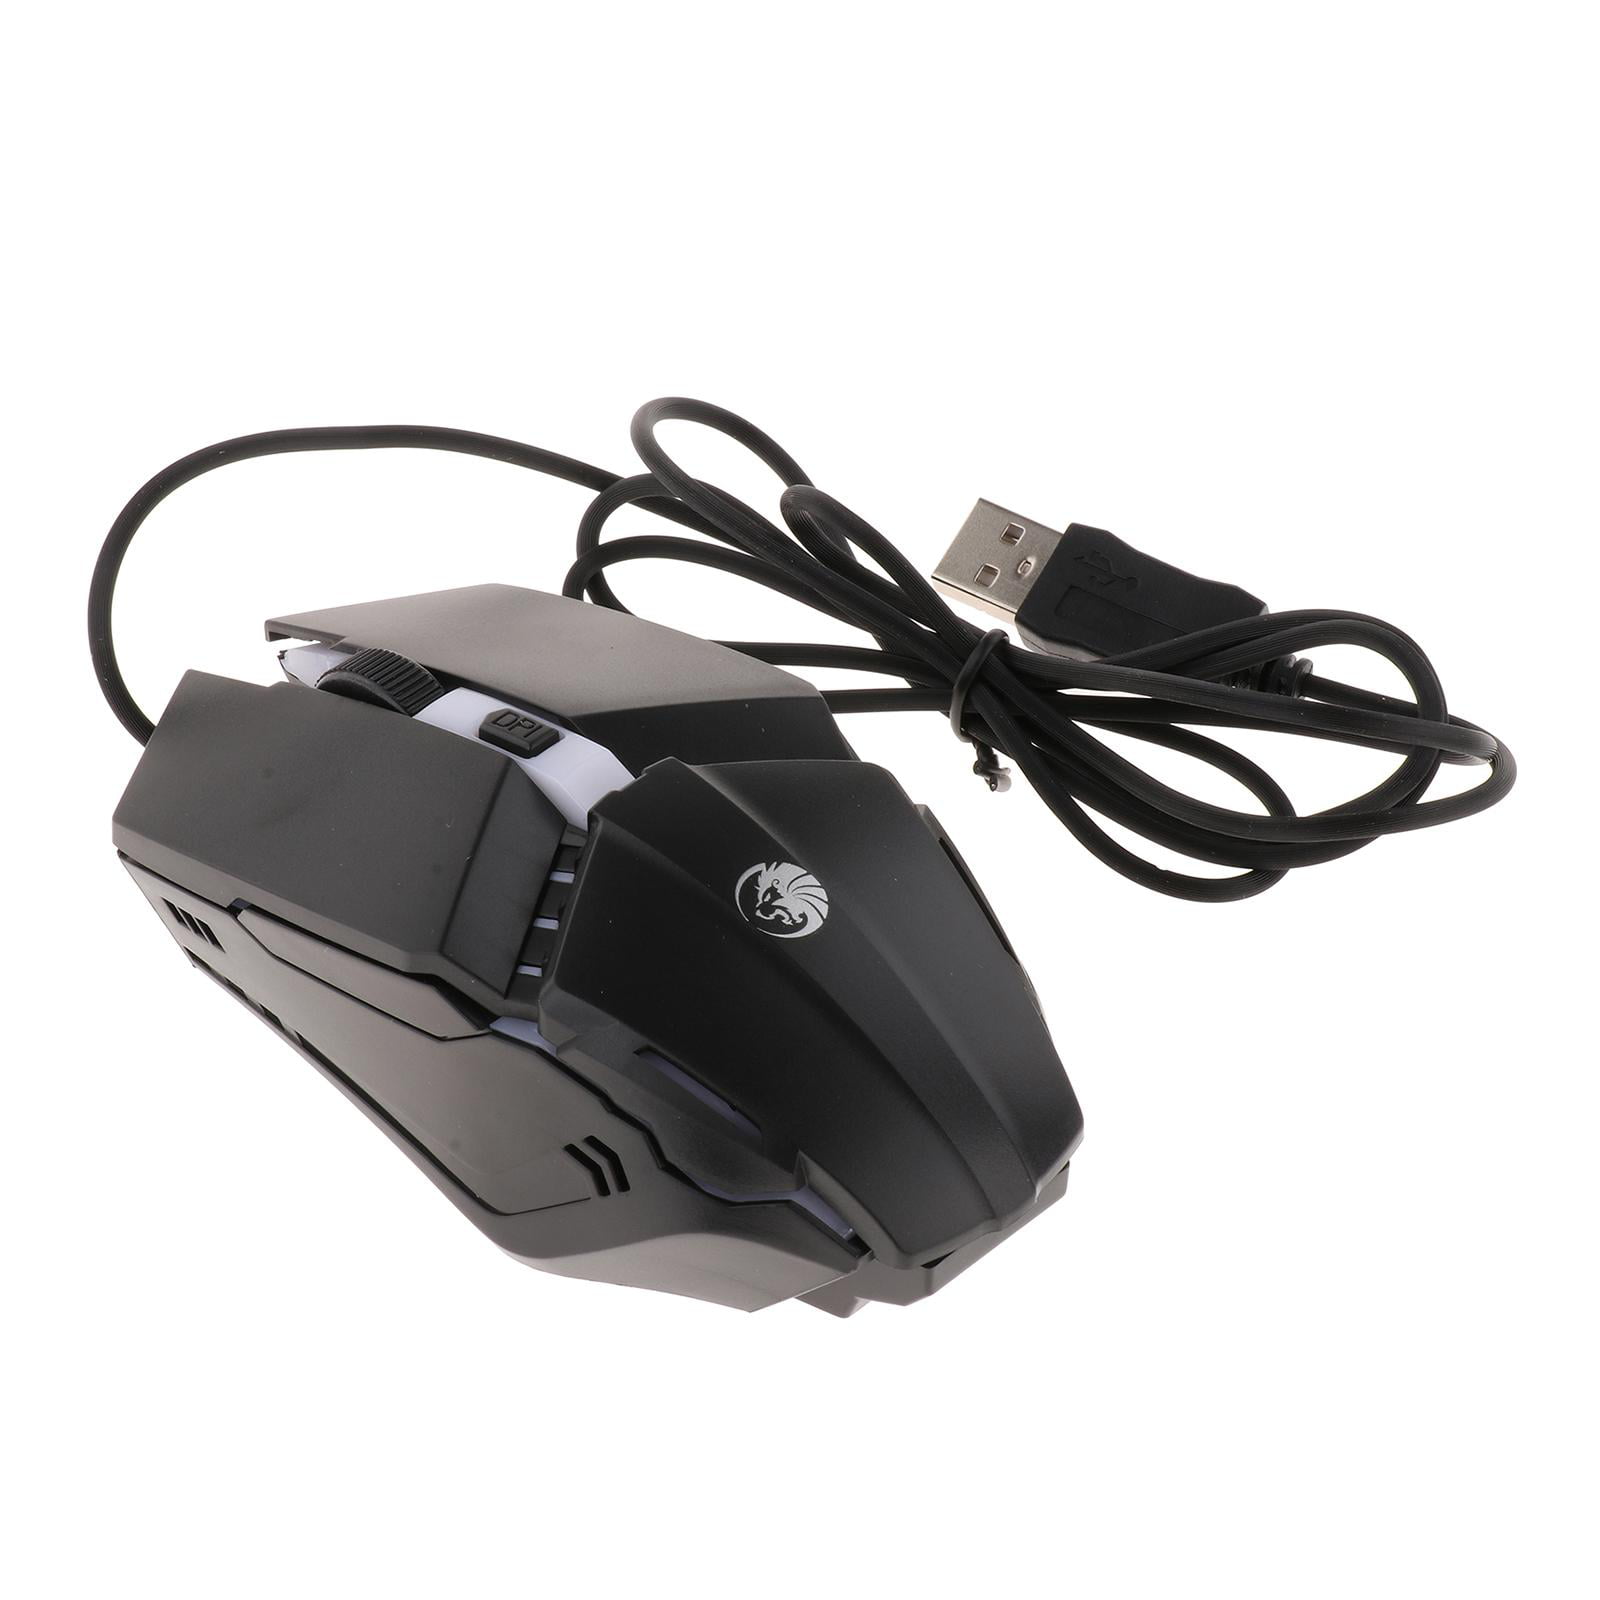 RAJFOO I5 Wired USB Gaming Mouse with LED Backlit 